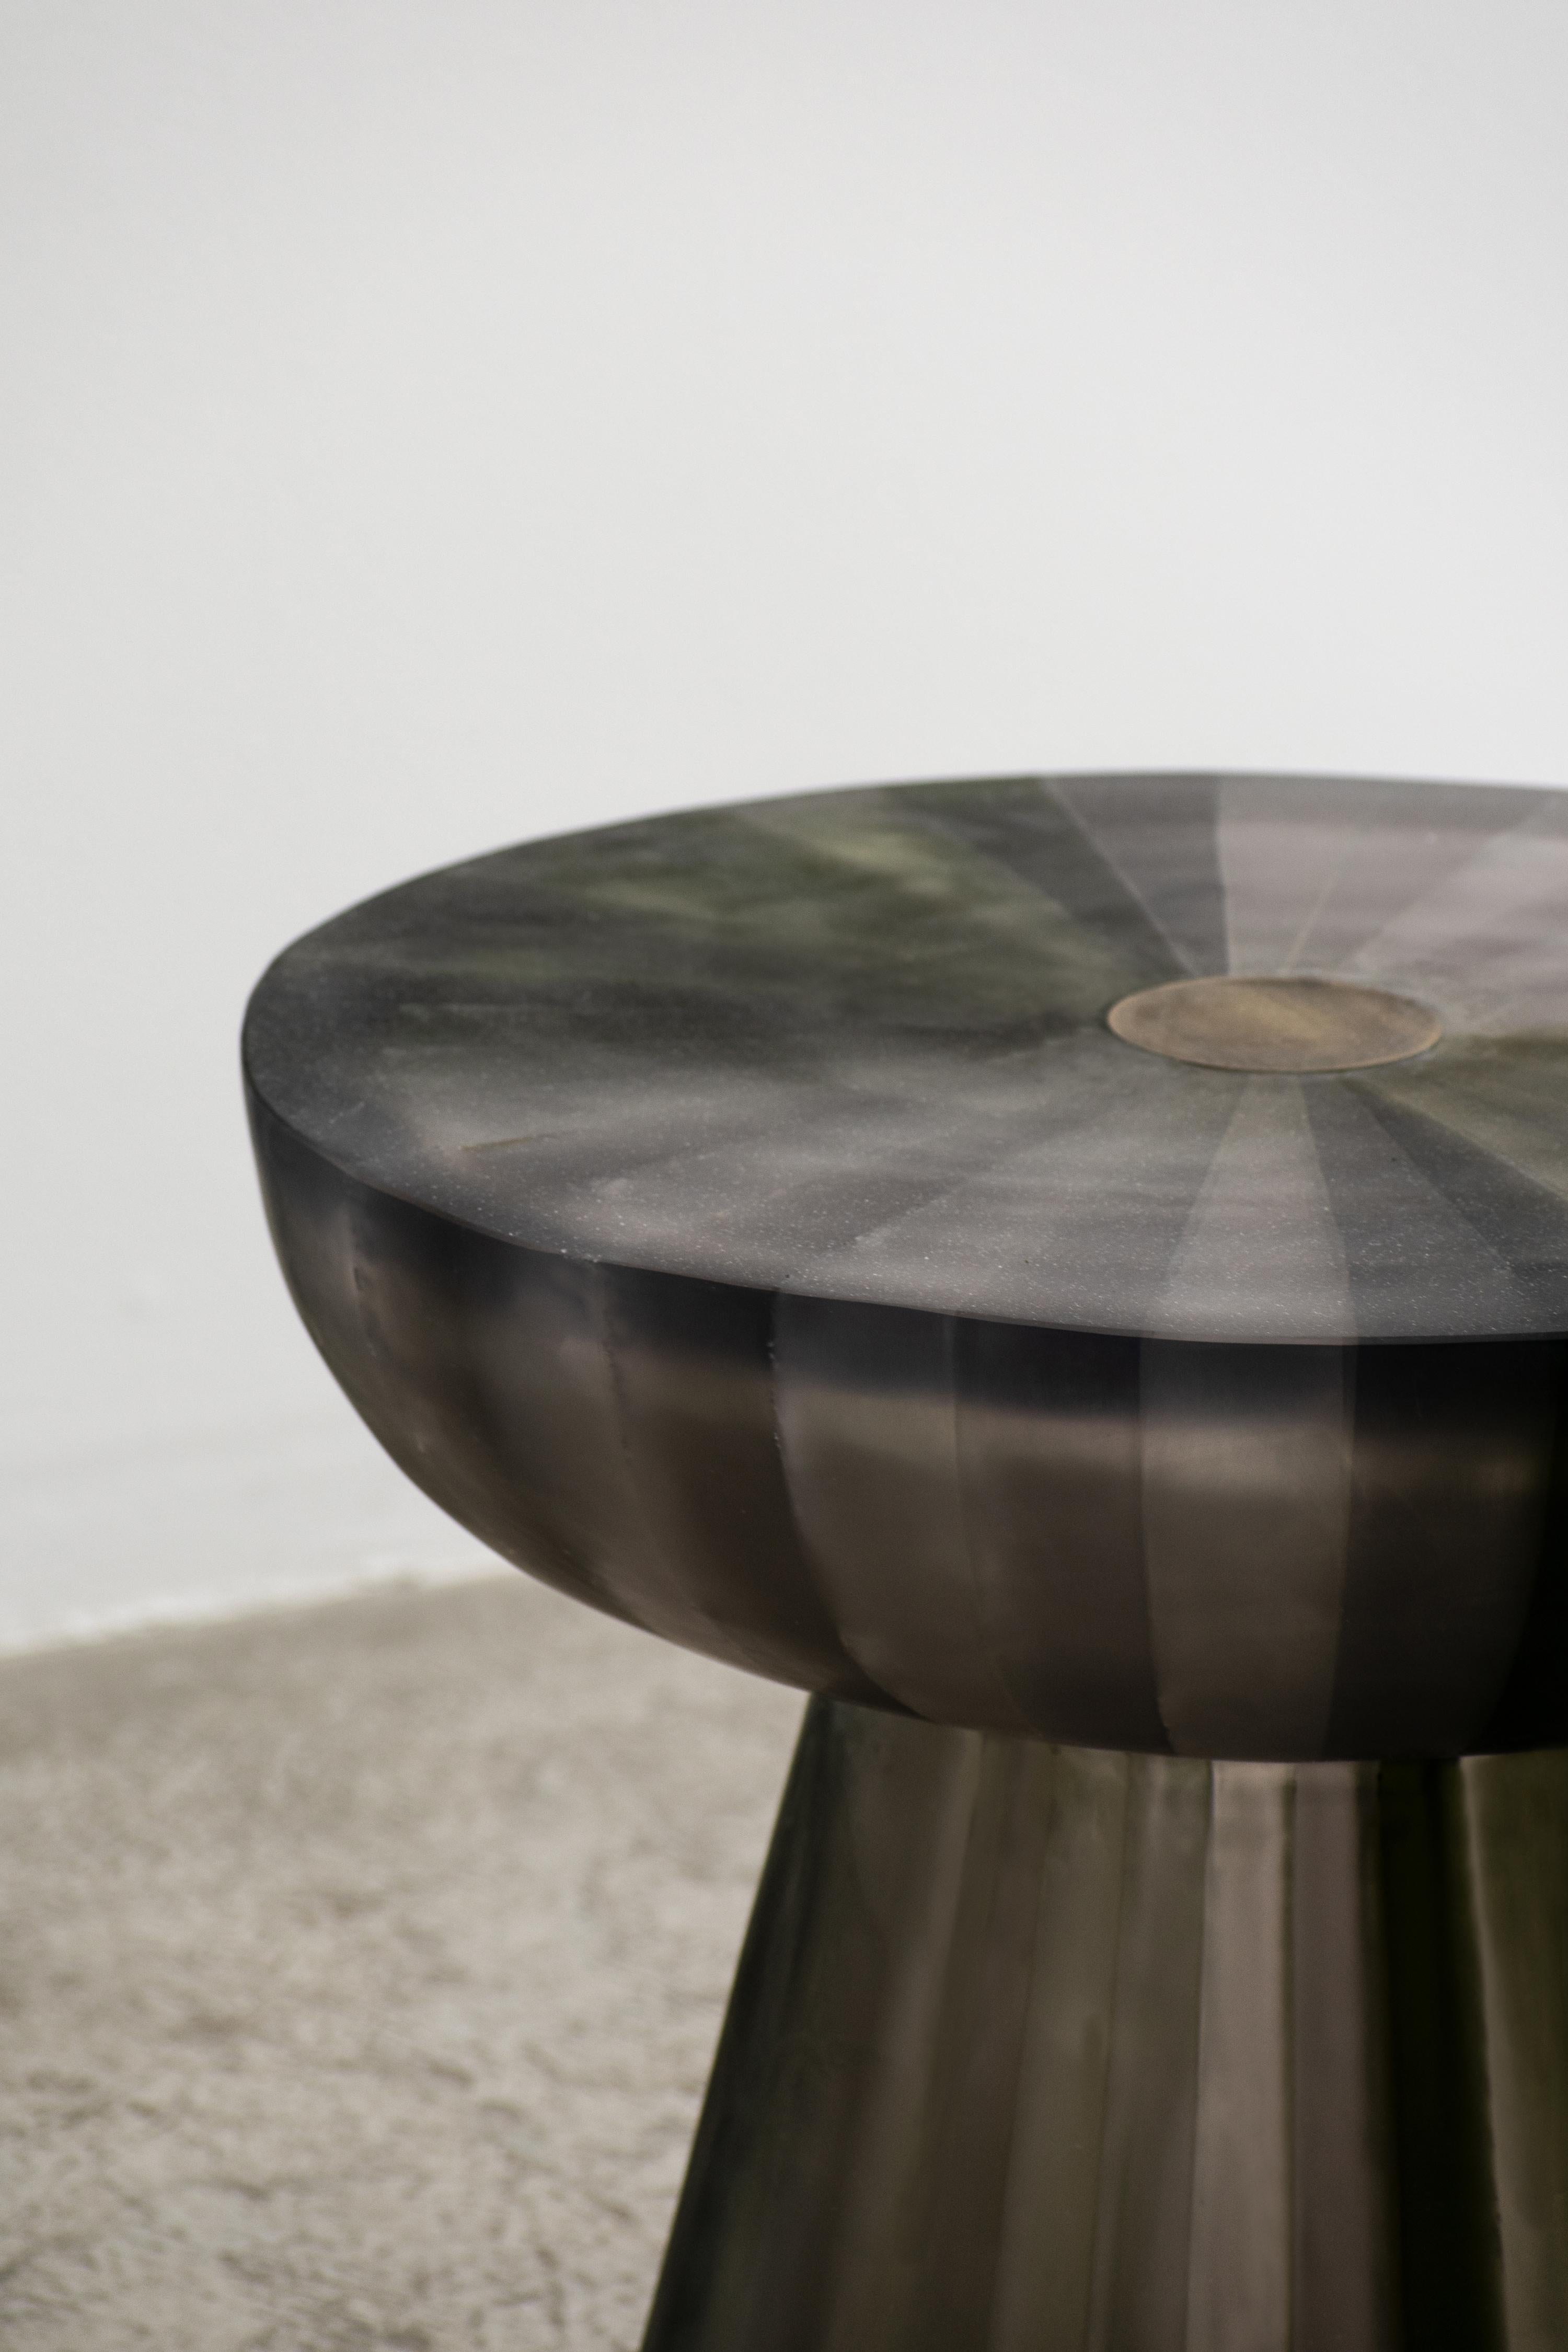 Resin stool
This family of furniture pieces is a collaboration between designers Ezequiel Farca + Cristina Grappin and Moises Hernandez. The idea behind this proposal is a chromatic experimentation with hues of resin, a material that for its